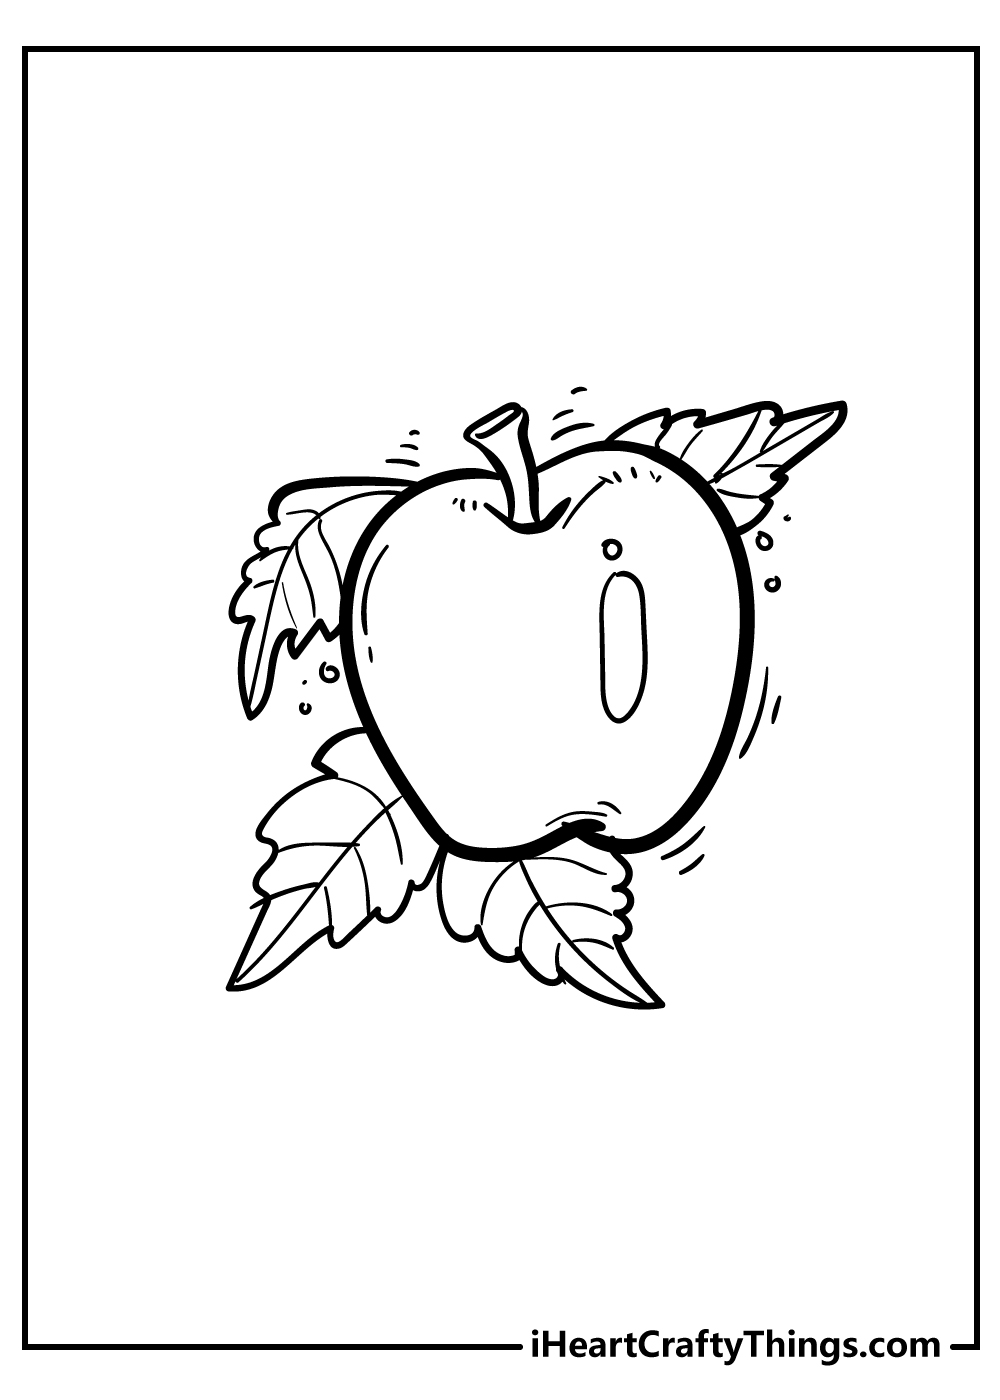 Apple Coloring Pages free download for preschoolers